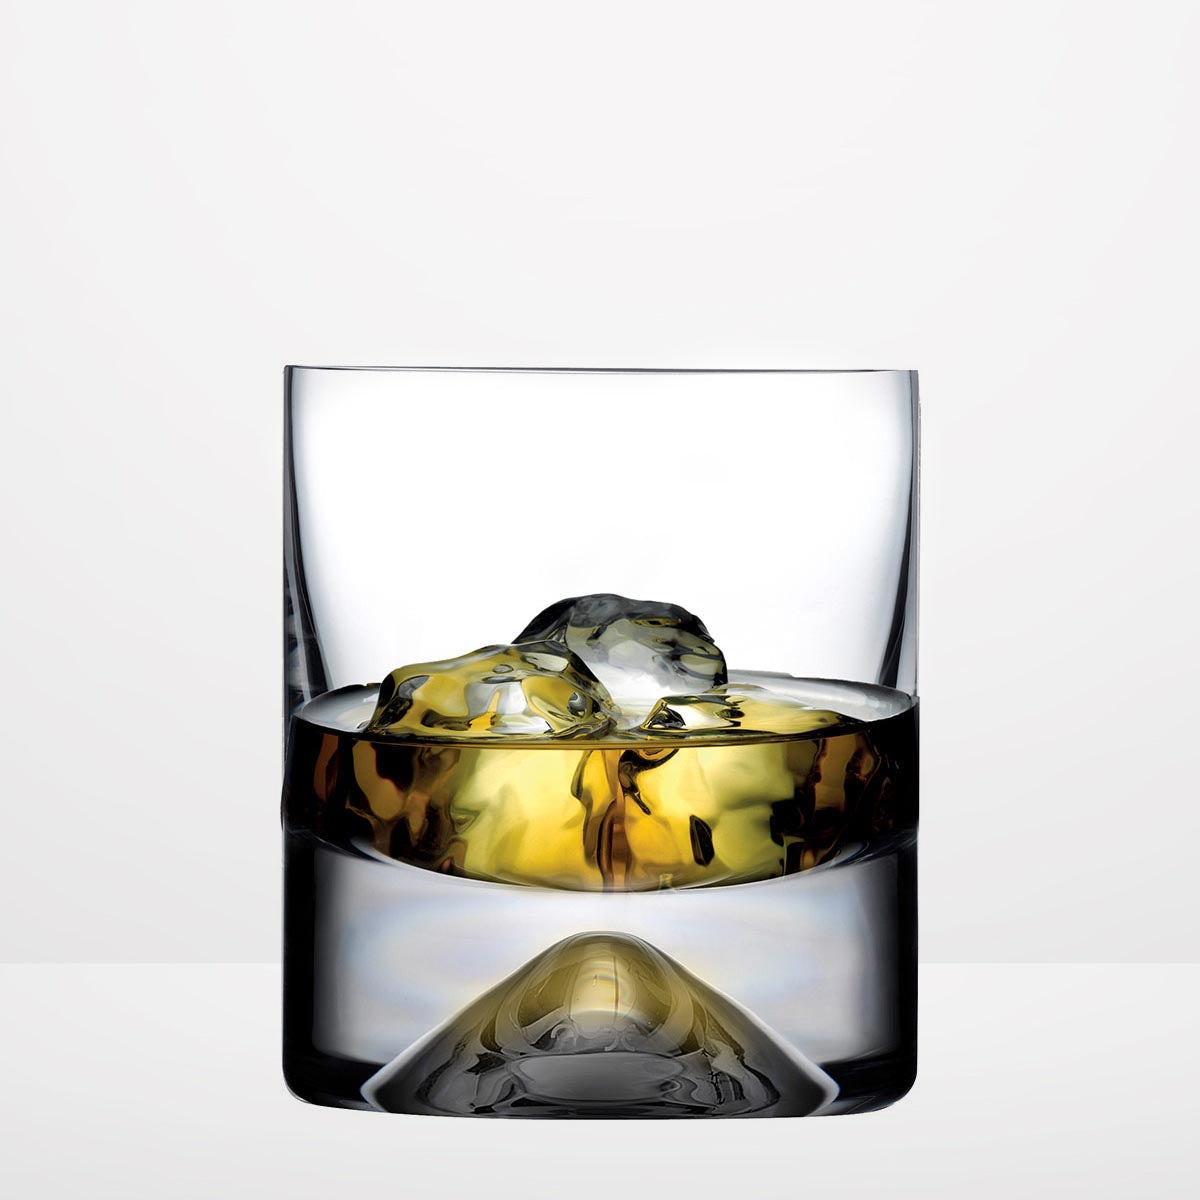 Nude No. 9 Whiskey Glasses Set of 2